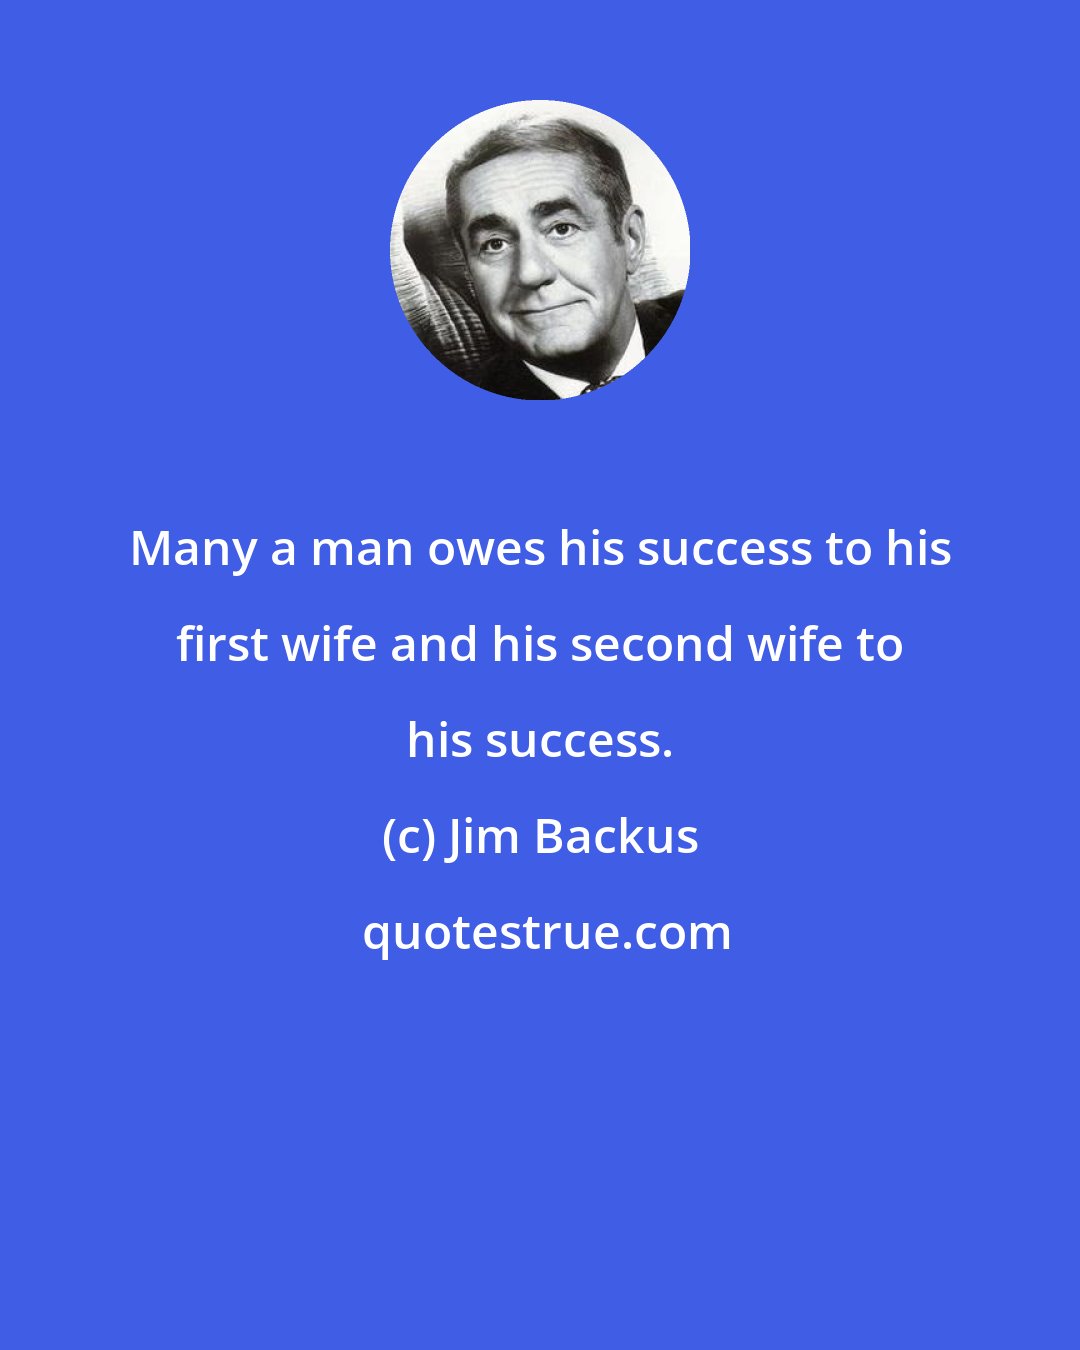 Jim Backus: Many a man owes his success to his first wife and his second wife to his success.